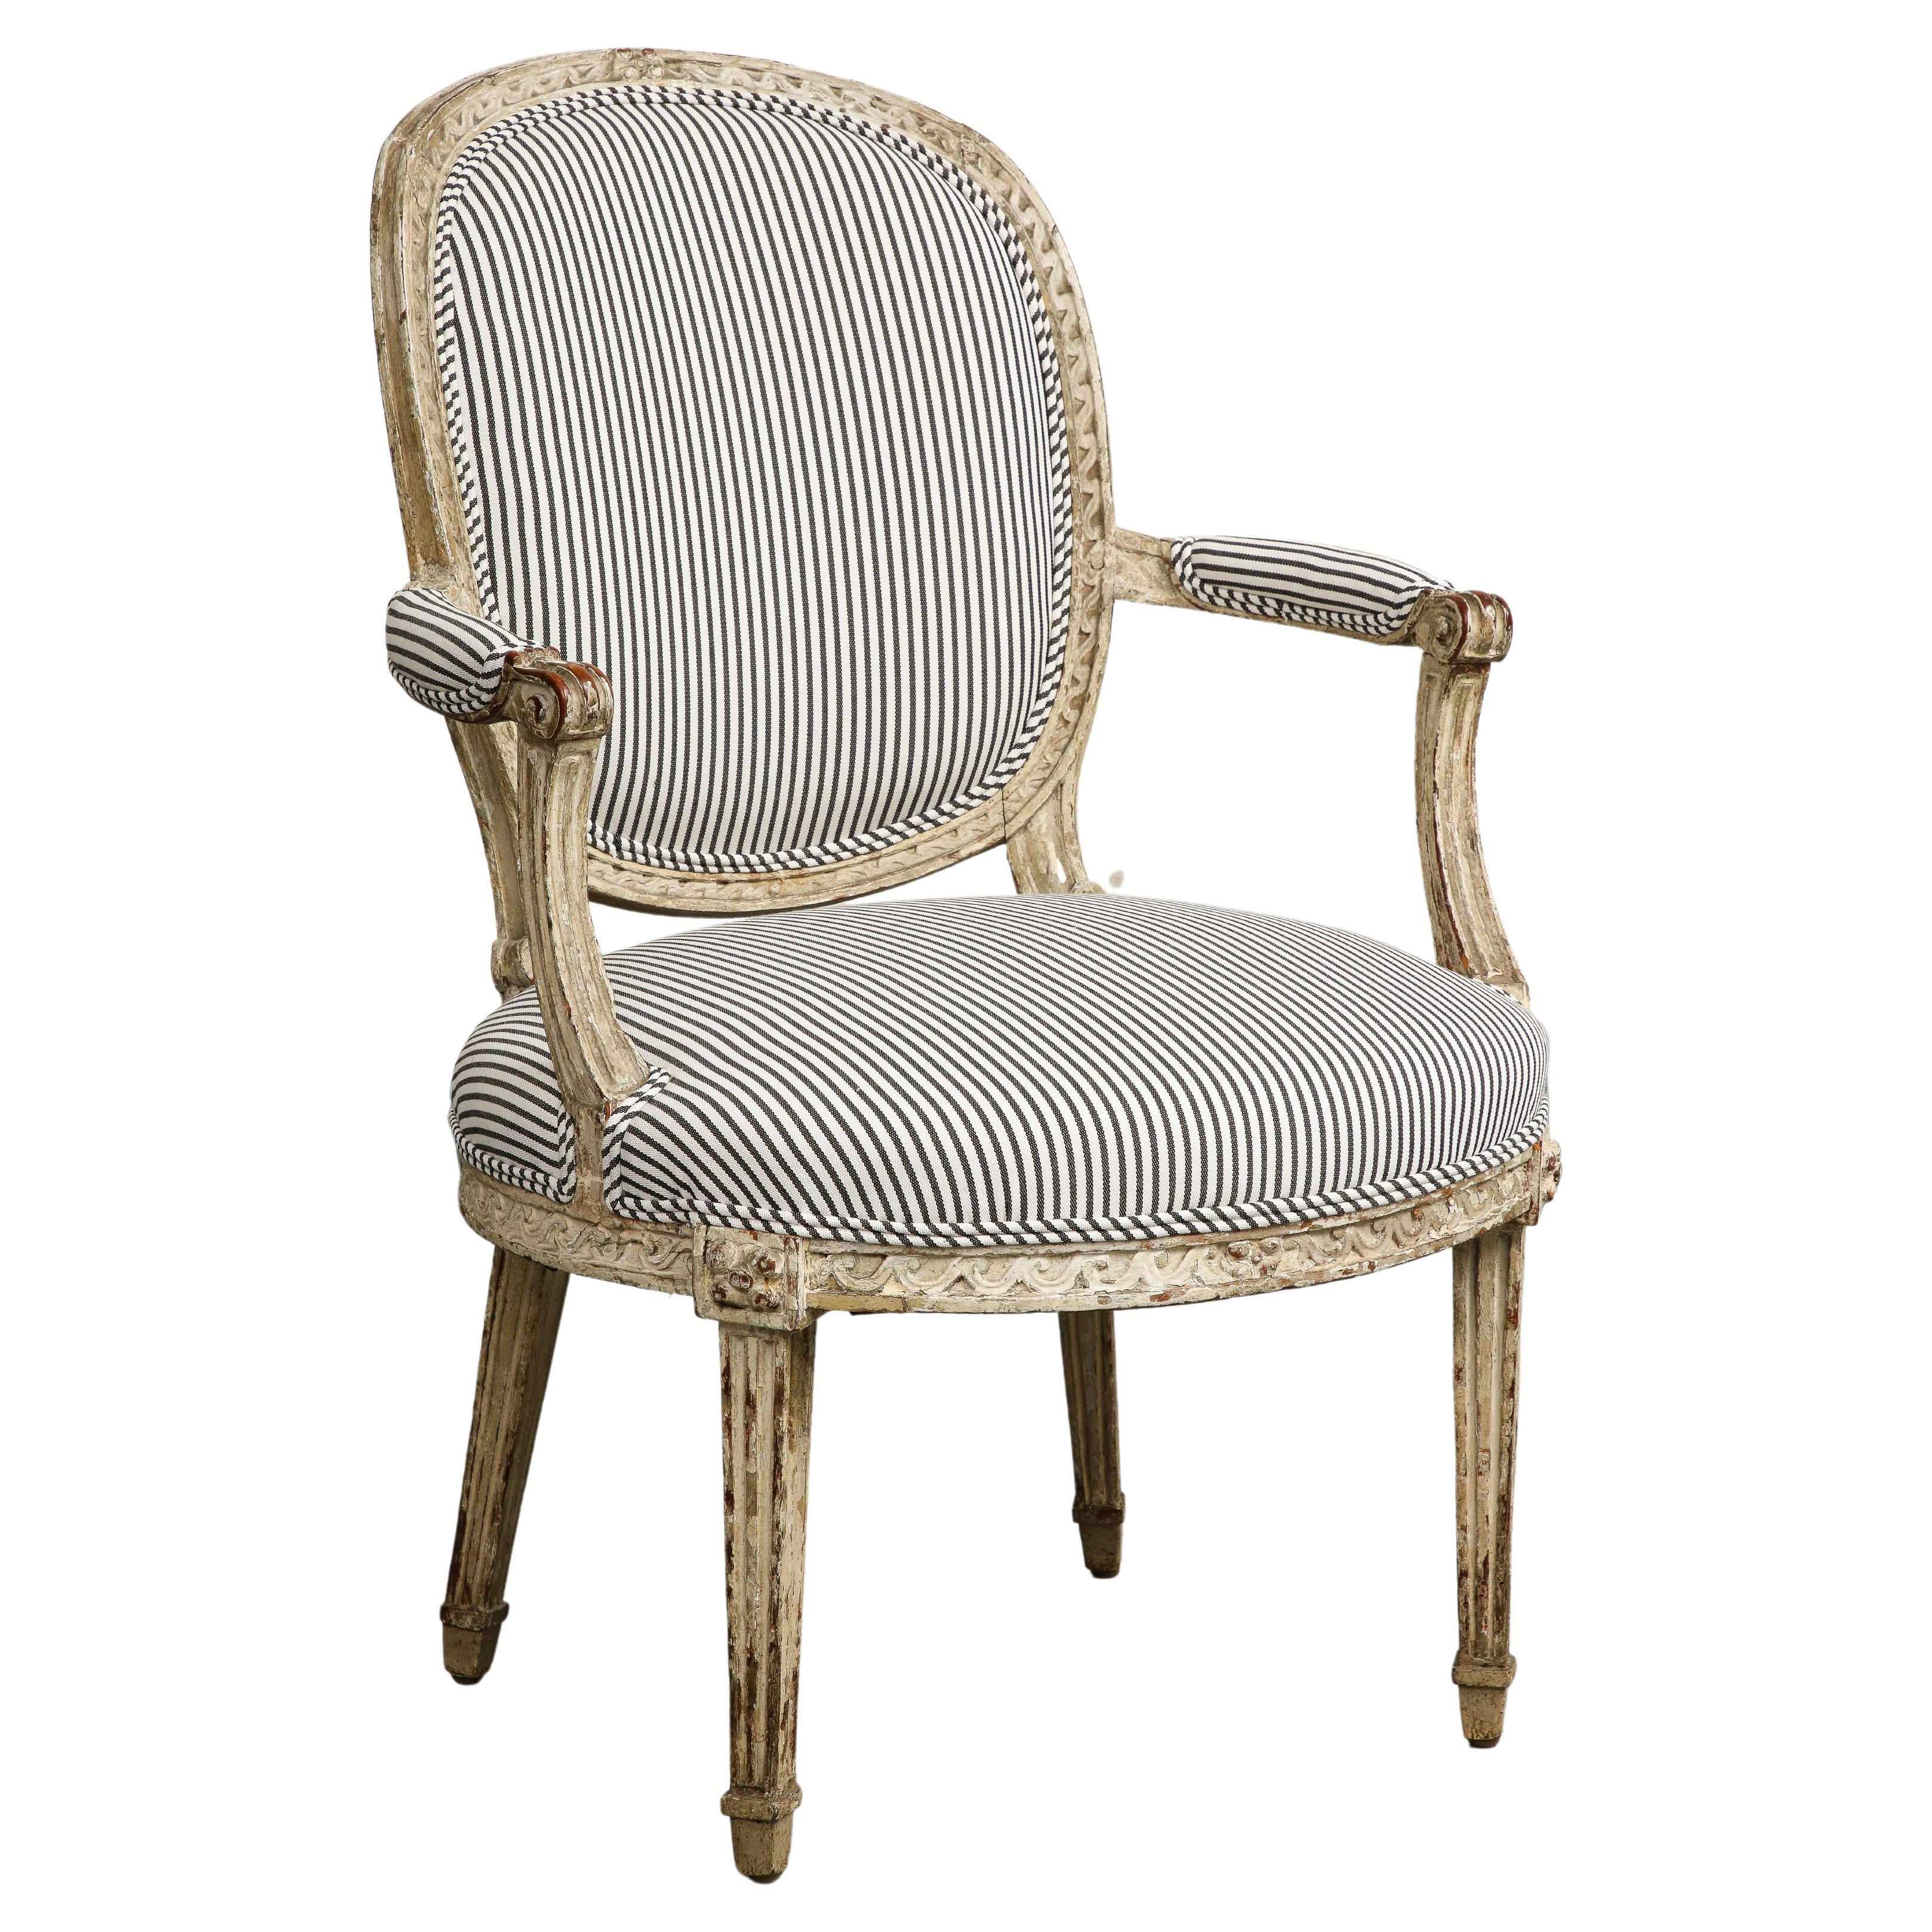 19th Century French Louis XVI Style Fauteuil Chair in Striped Linen Upholstery For Sale